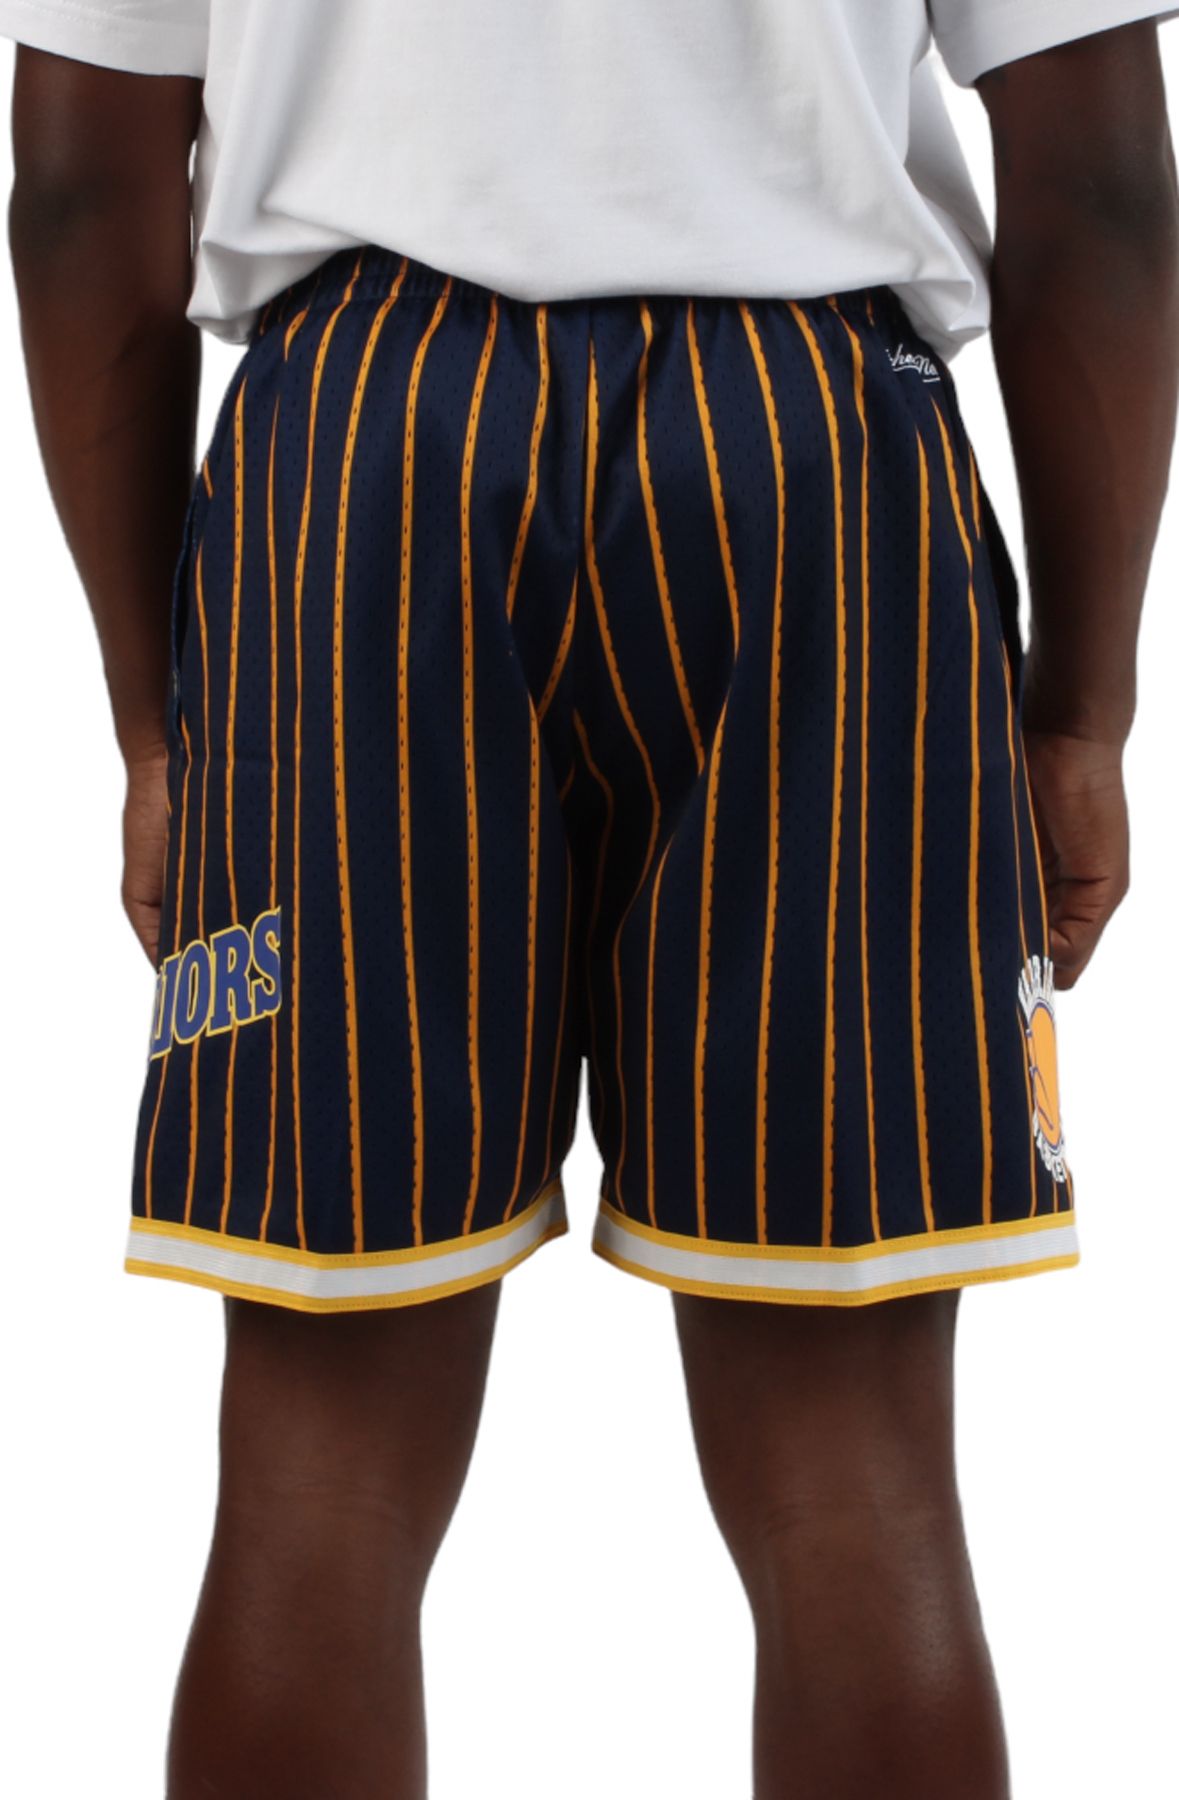 Golden State Warriors NBA Utility Short By Mitchell & Ness - Mens